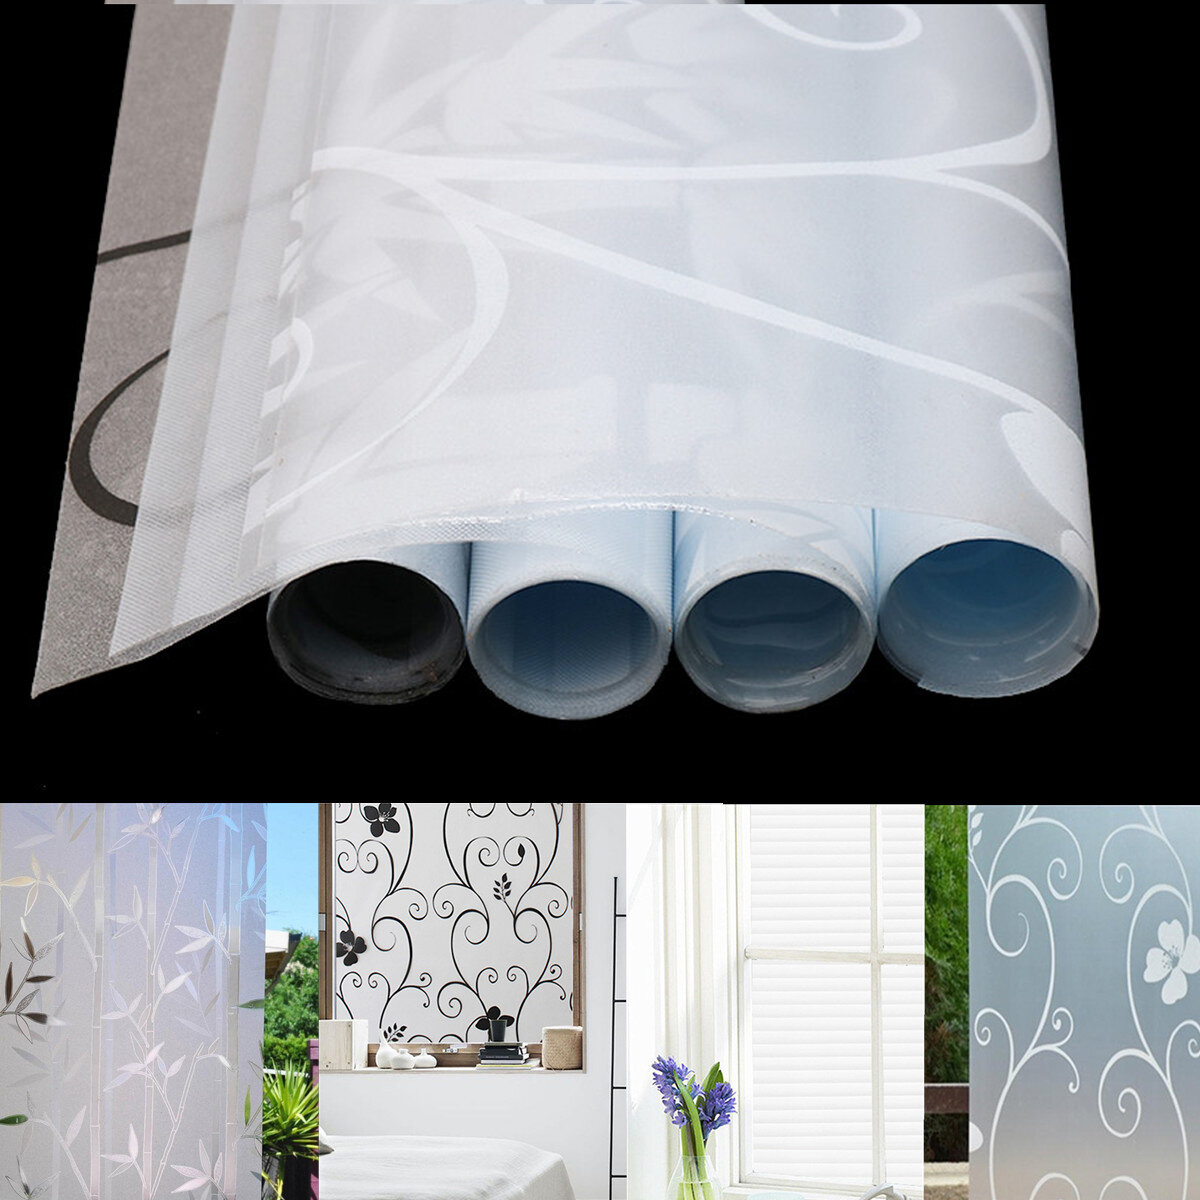 

45*200cm Bedroom Bathroom Home Glass Window Door Privacy Film Sticker PVC Frosted, White